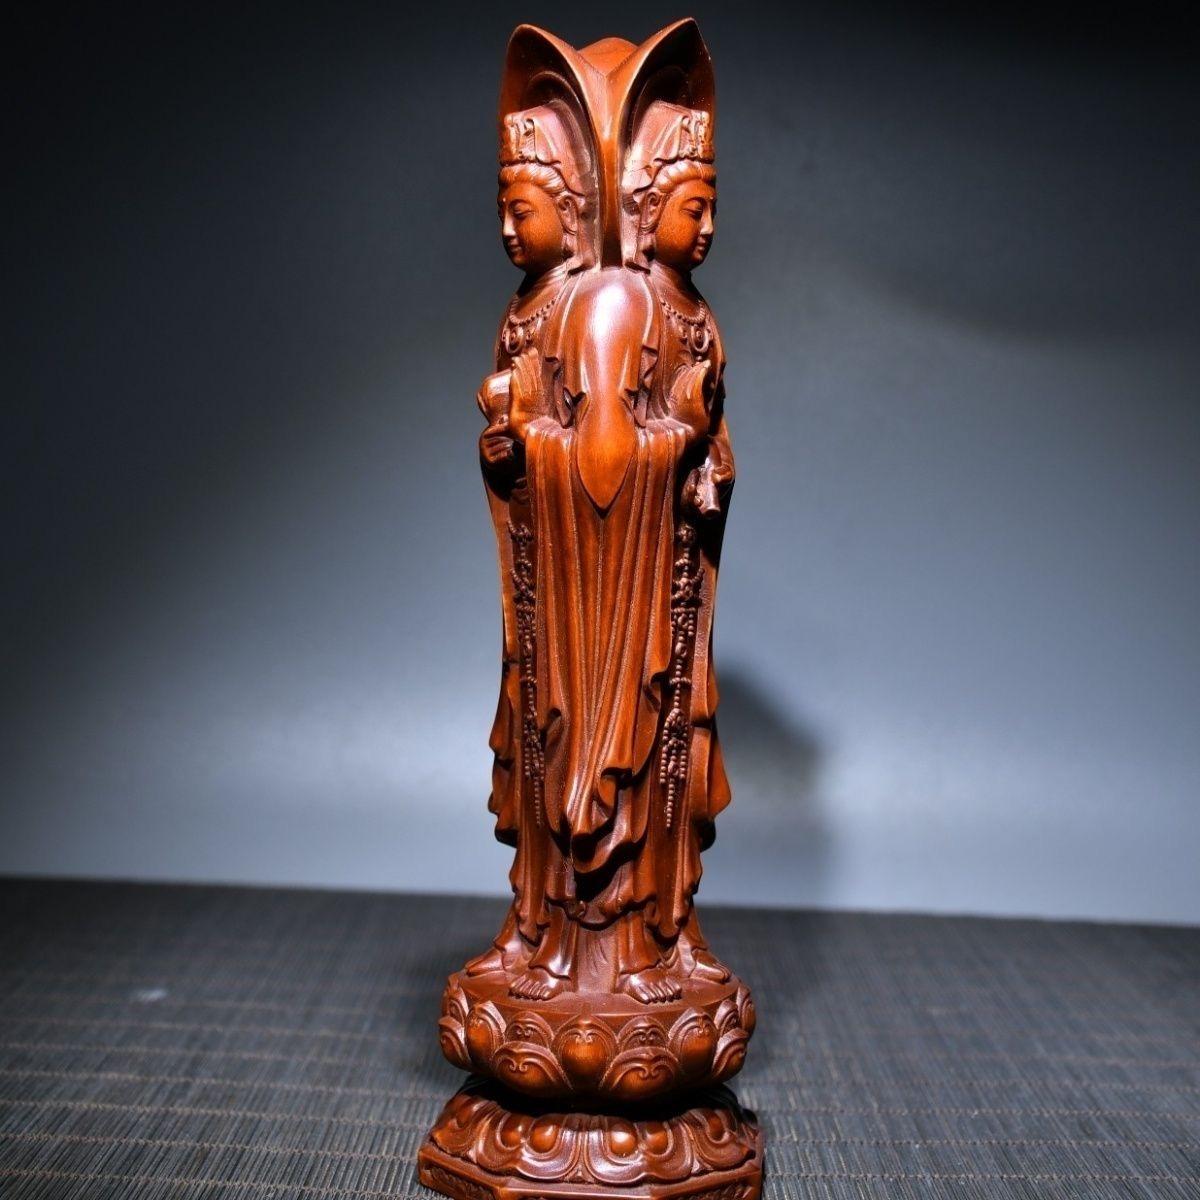 Chinese Vintage Wood Carving Three Sided Guan Yin Buddhas Statue For Sale 4